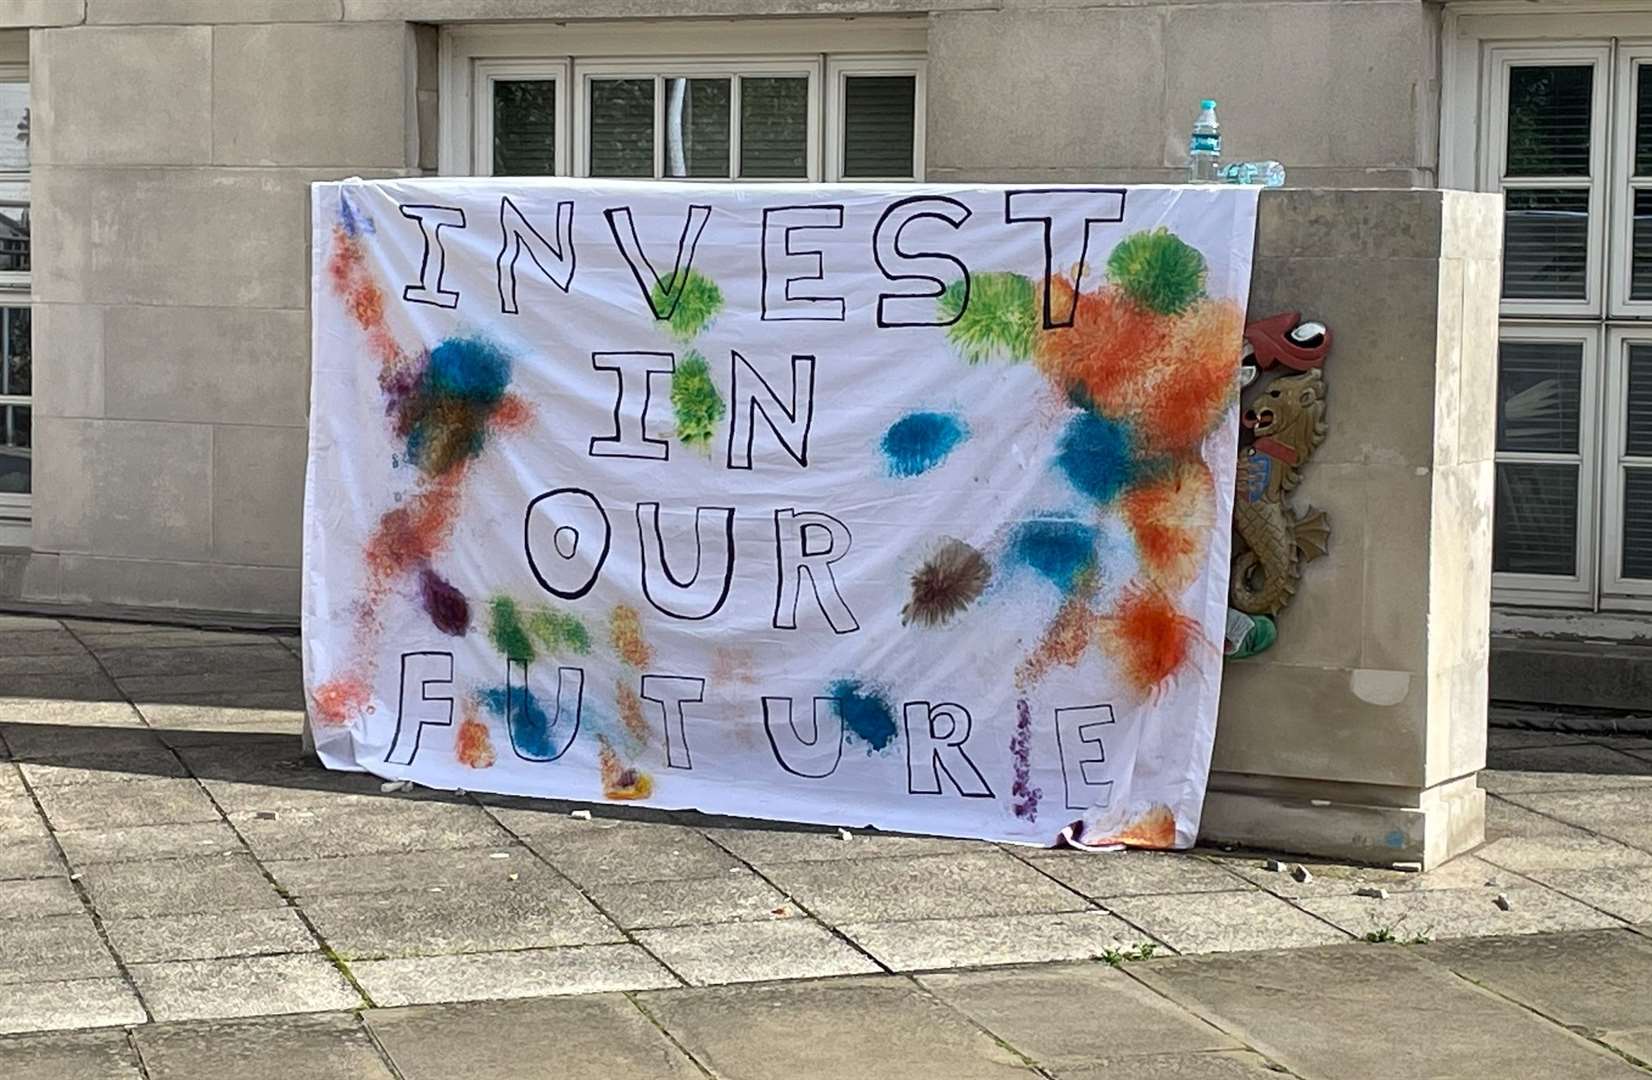 Members of youth clubs around Kent are protesting funding cuts